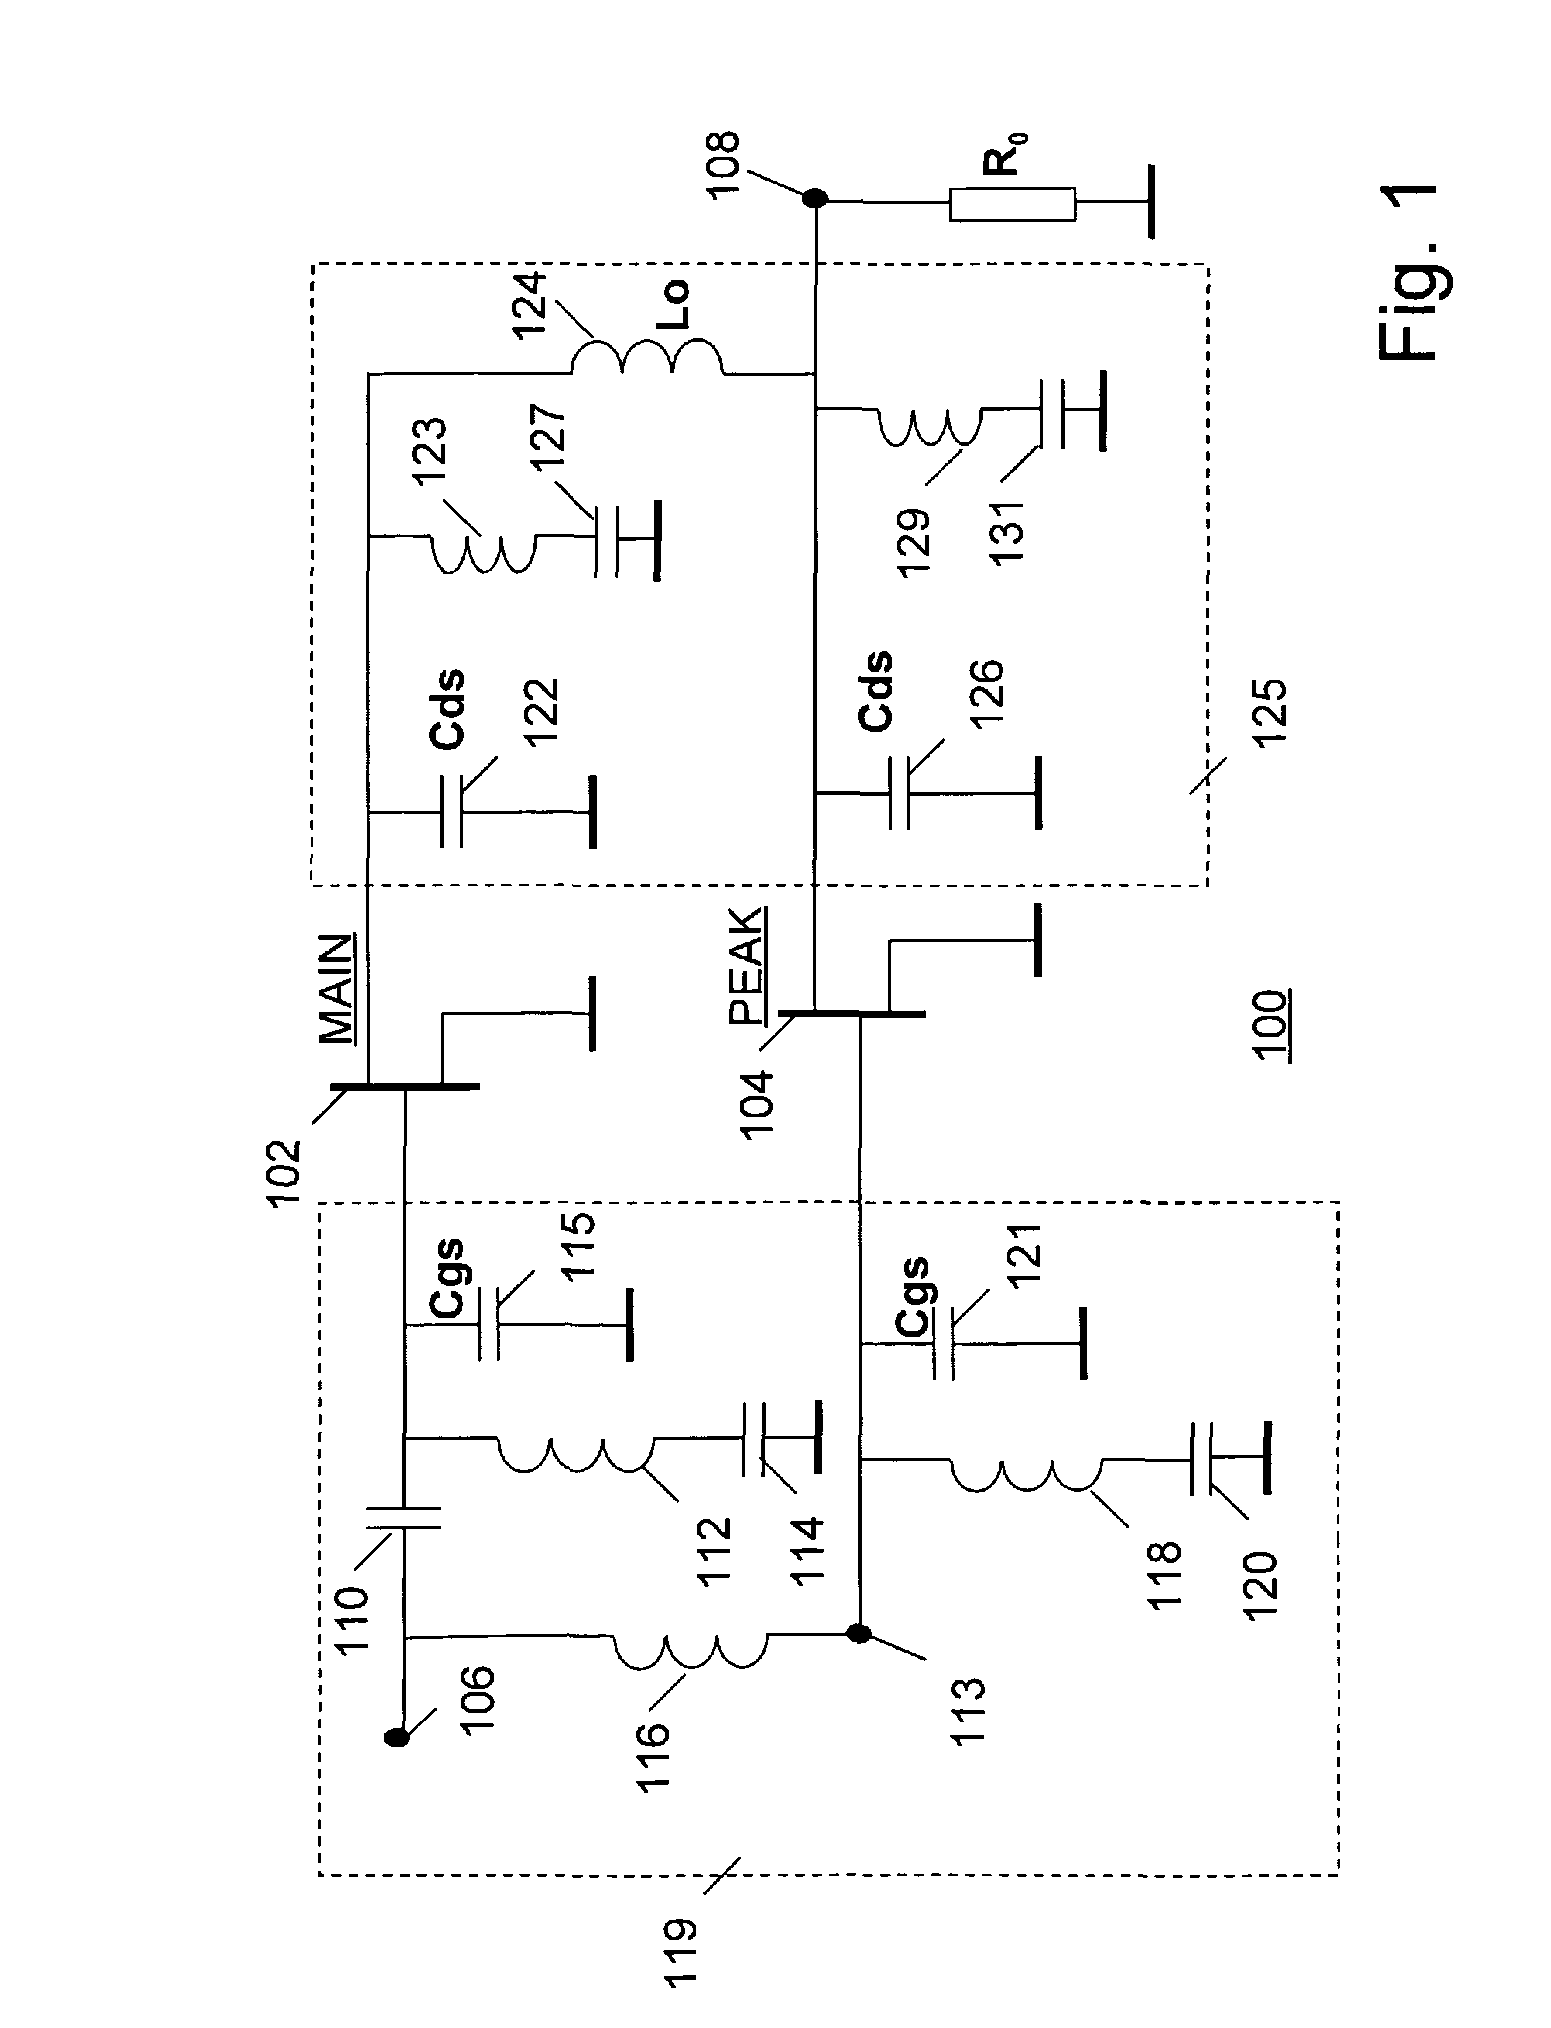 Doherty amplifier with input network optimized for MMIC